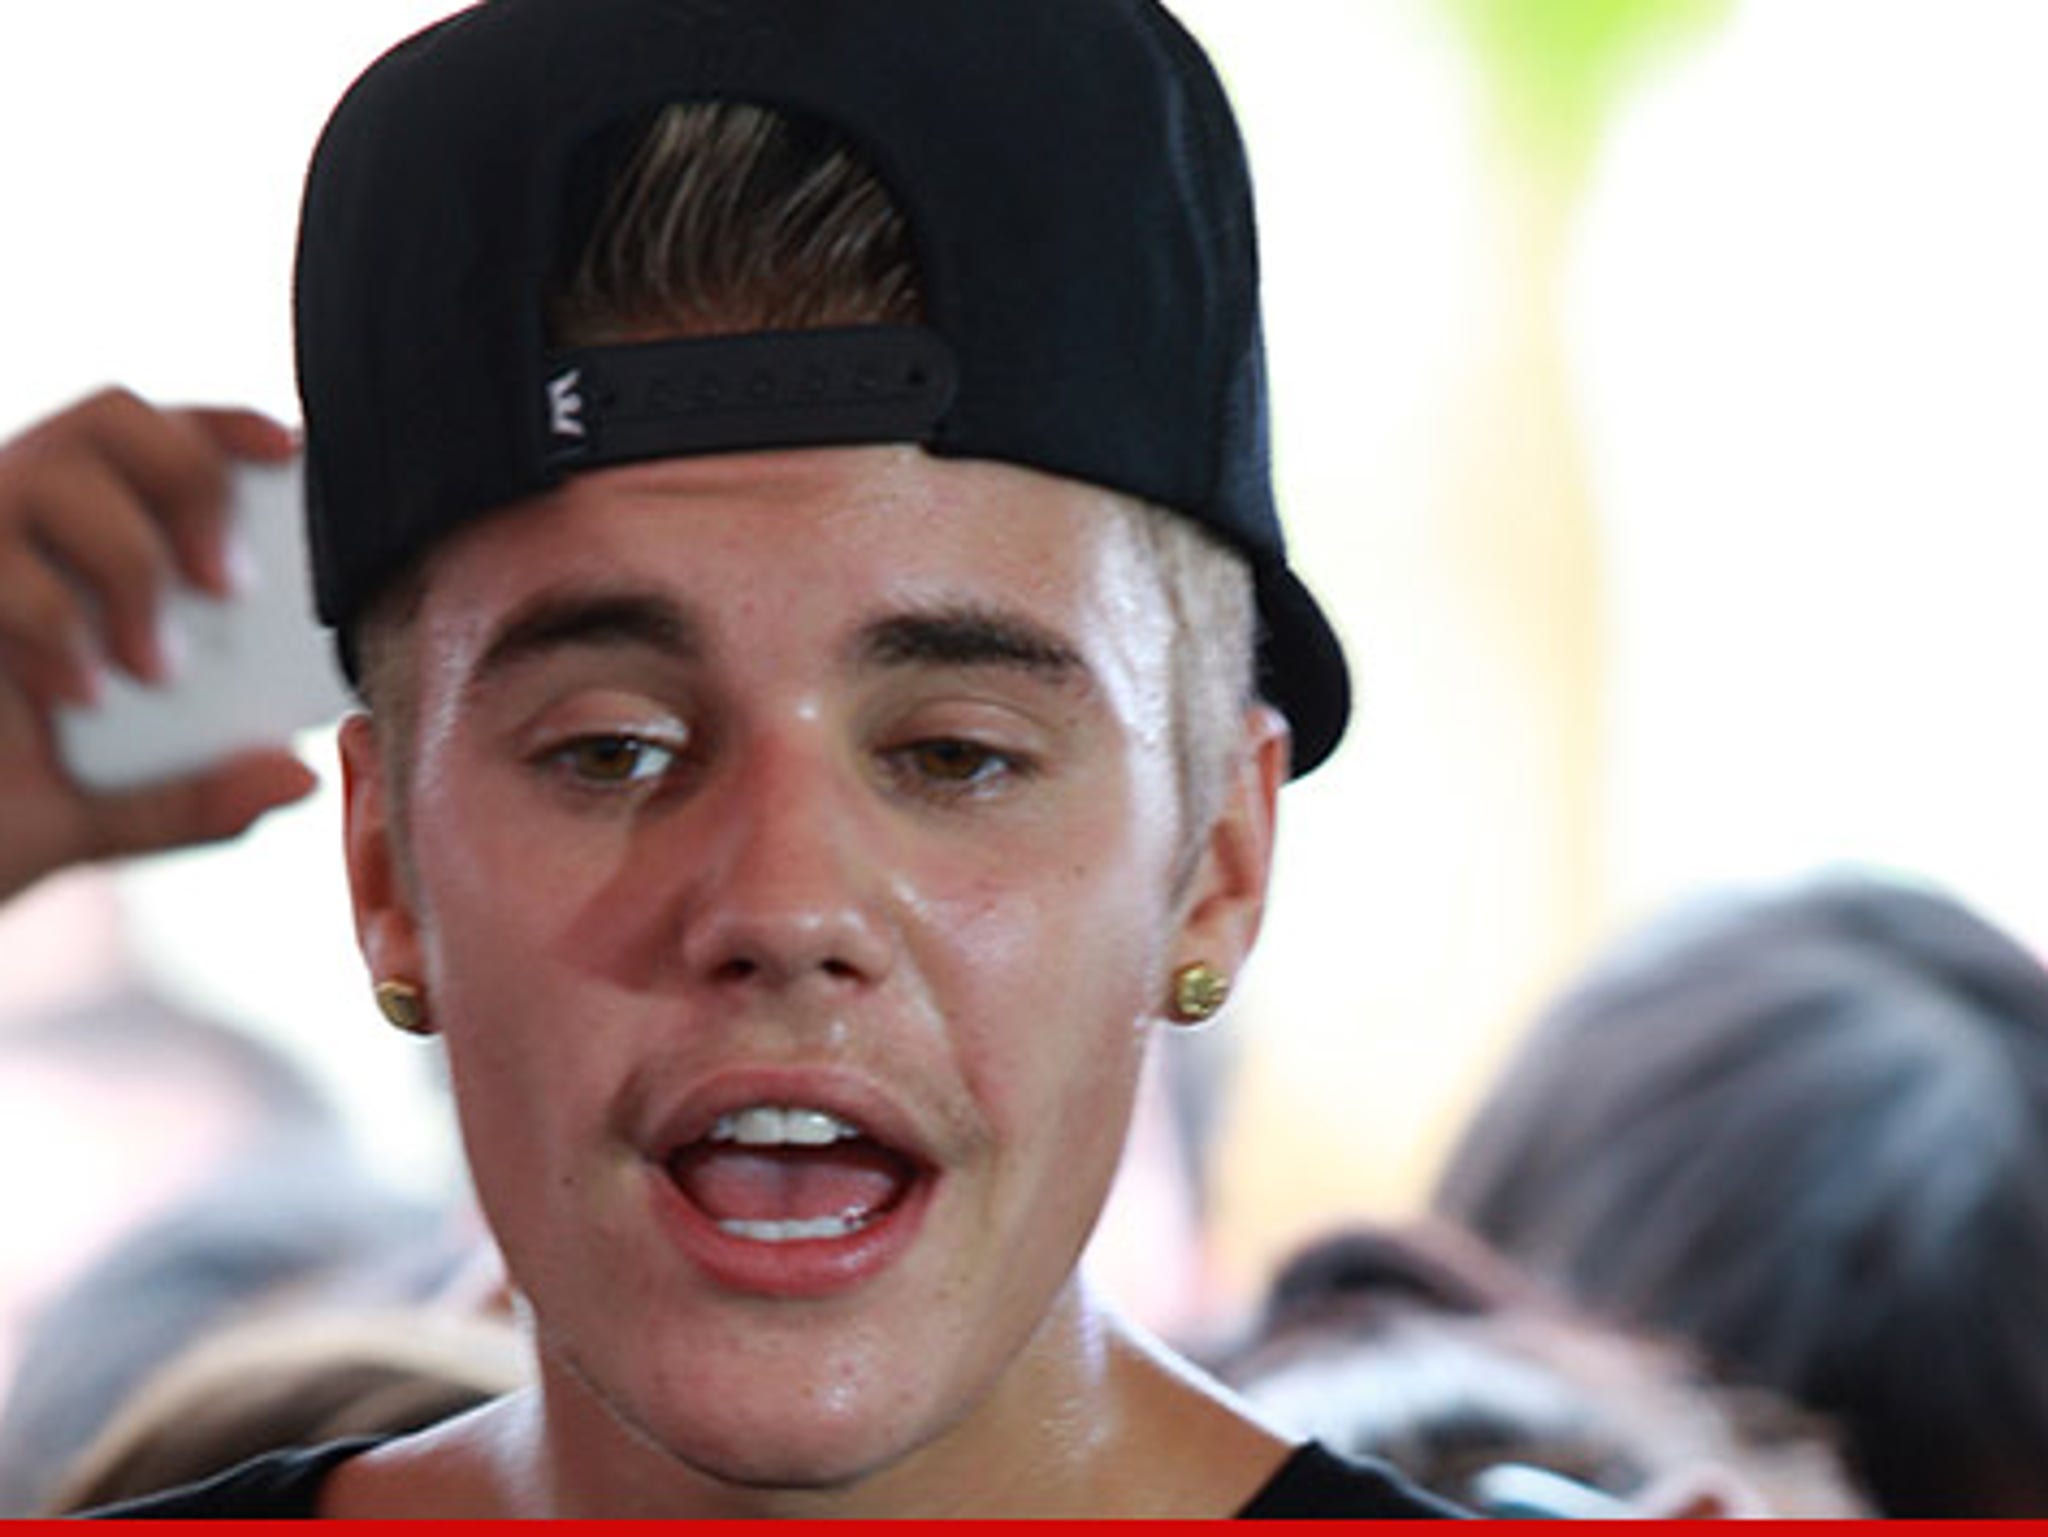 Justin Bieber on the Low Point of His Past Drug Use